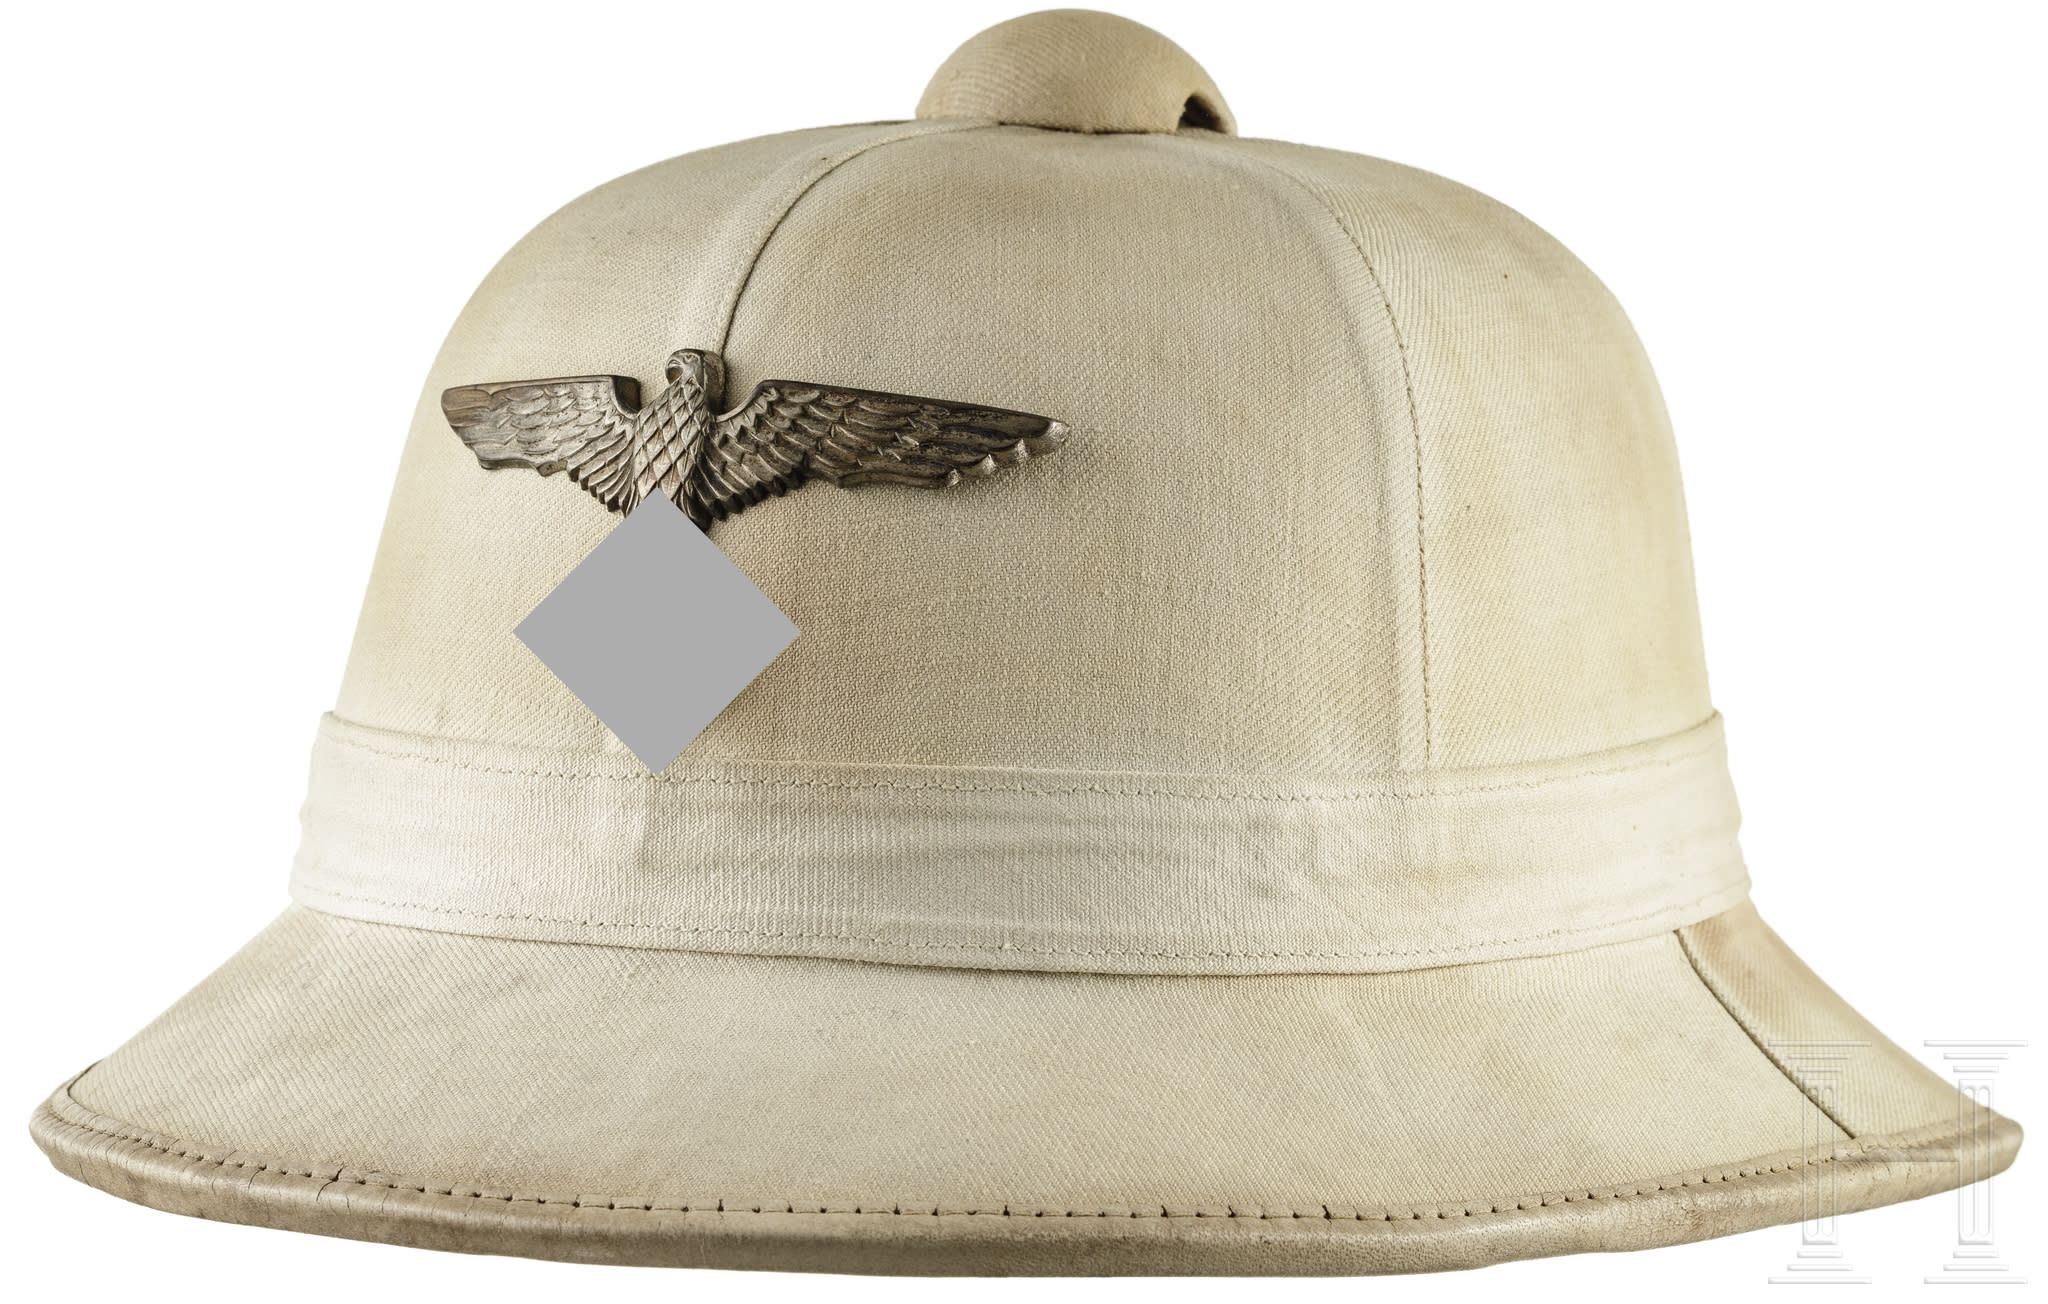 A German pith helmet for the white summer uniform of the 